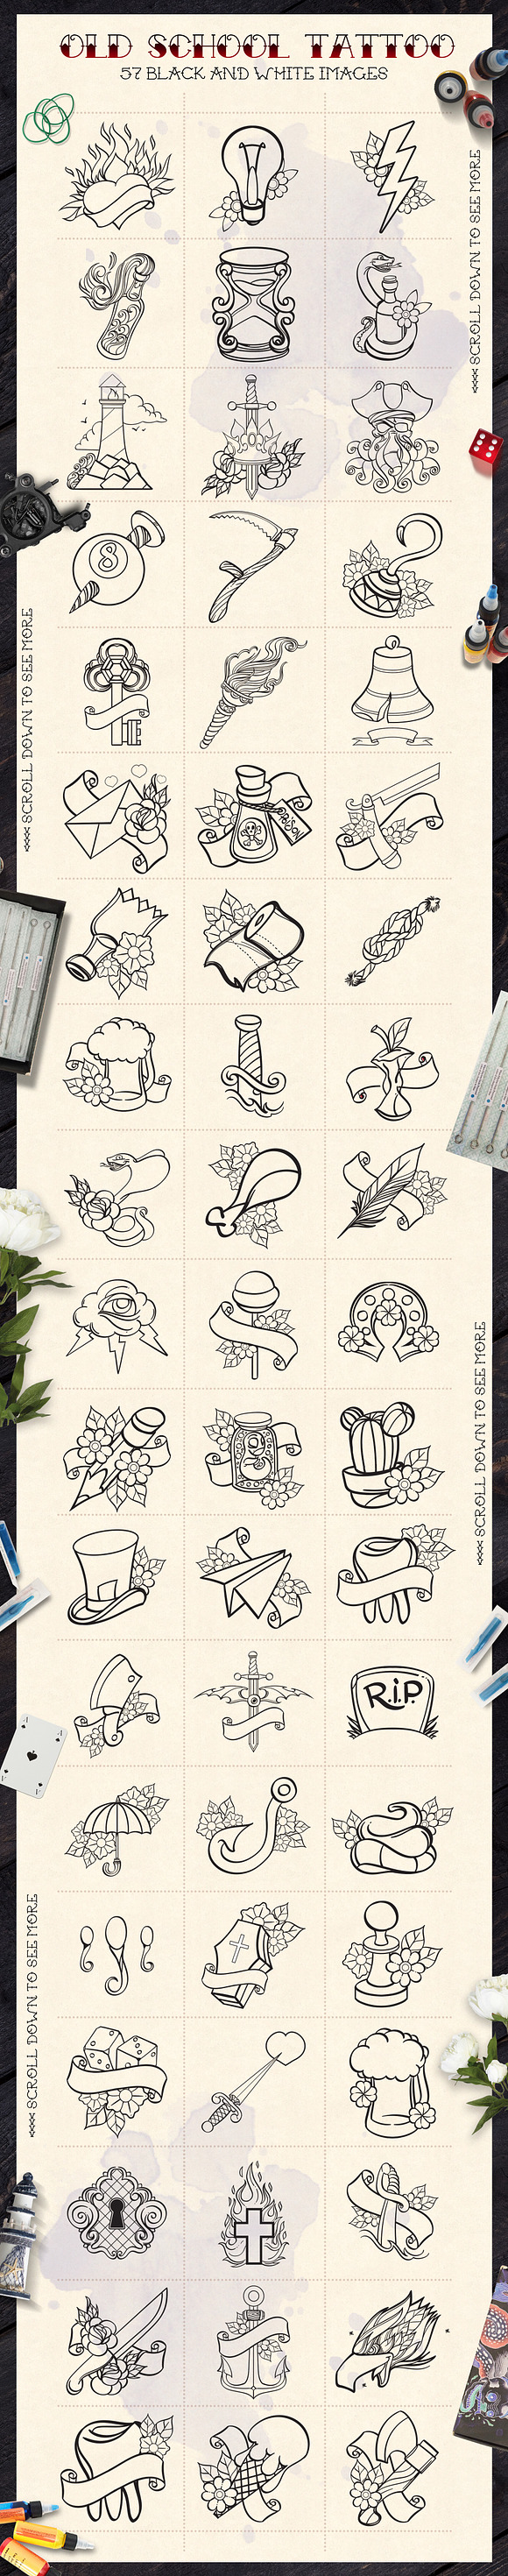 Old School Tattoo in Illustrations - product preview 1